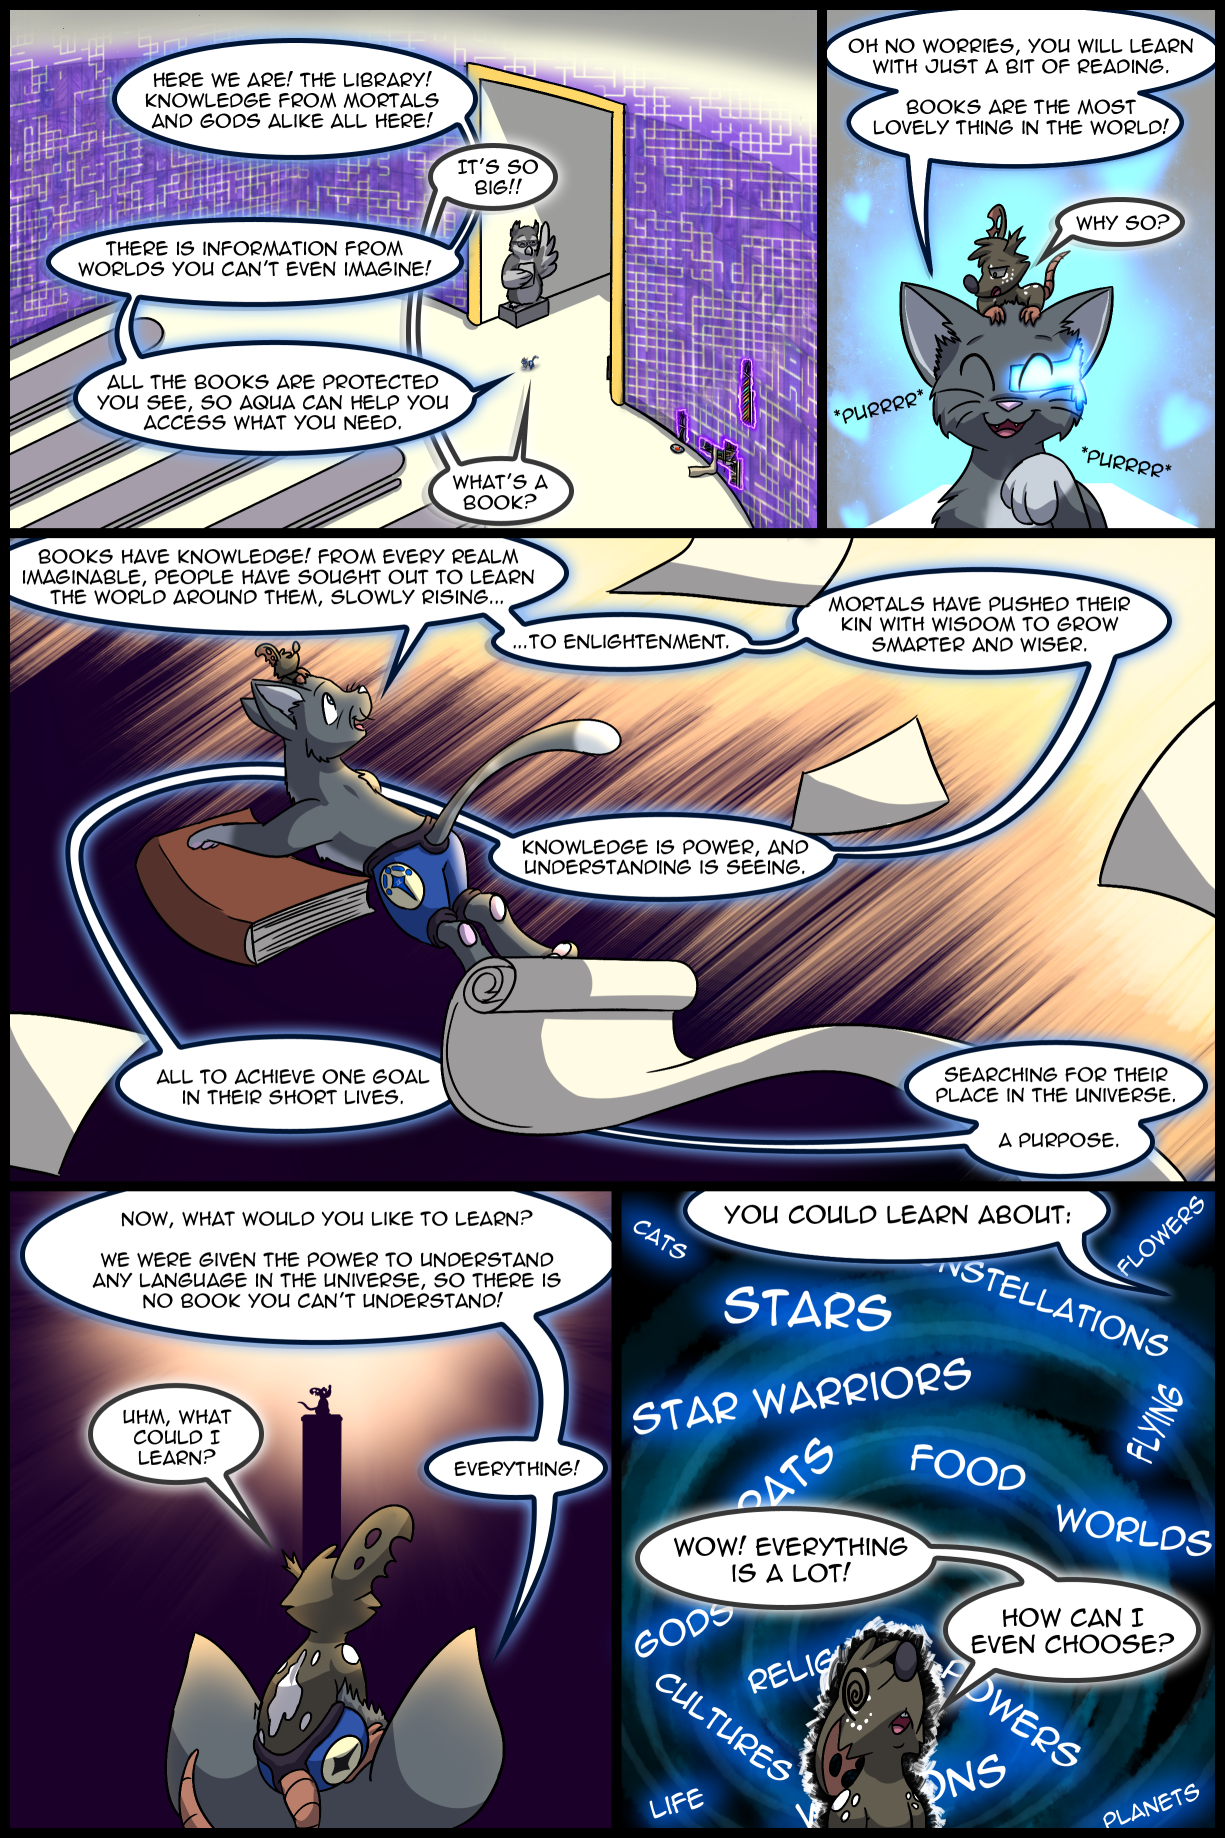 Ch4 Page 27 – Learn Everything